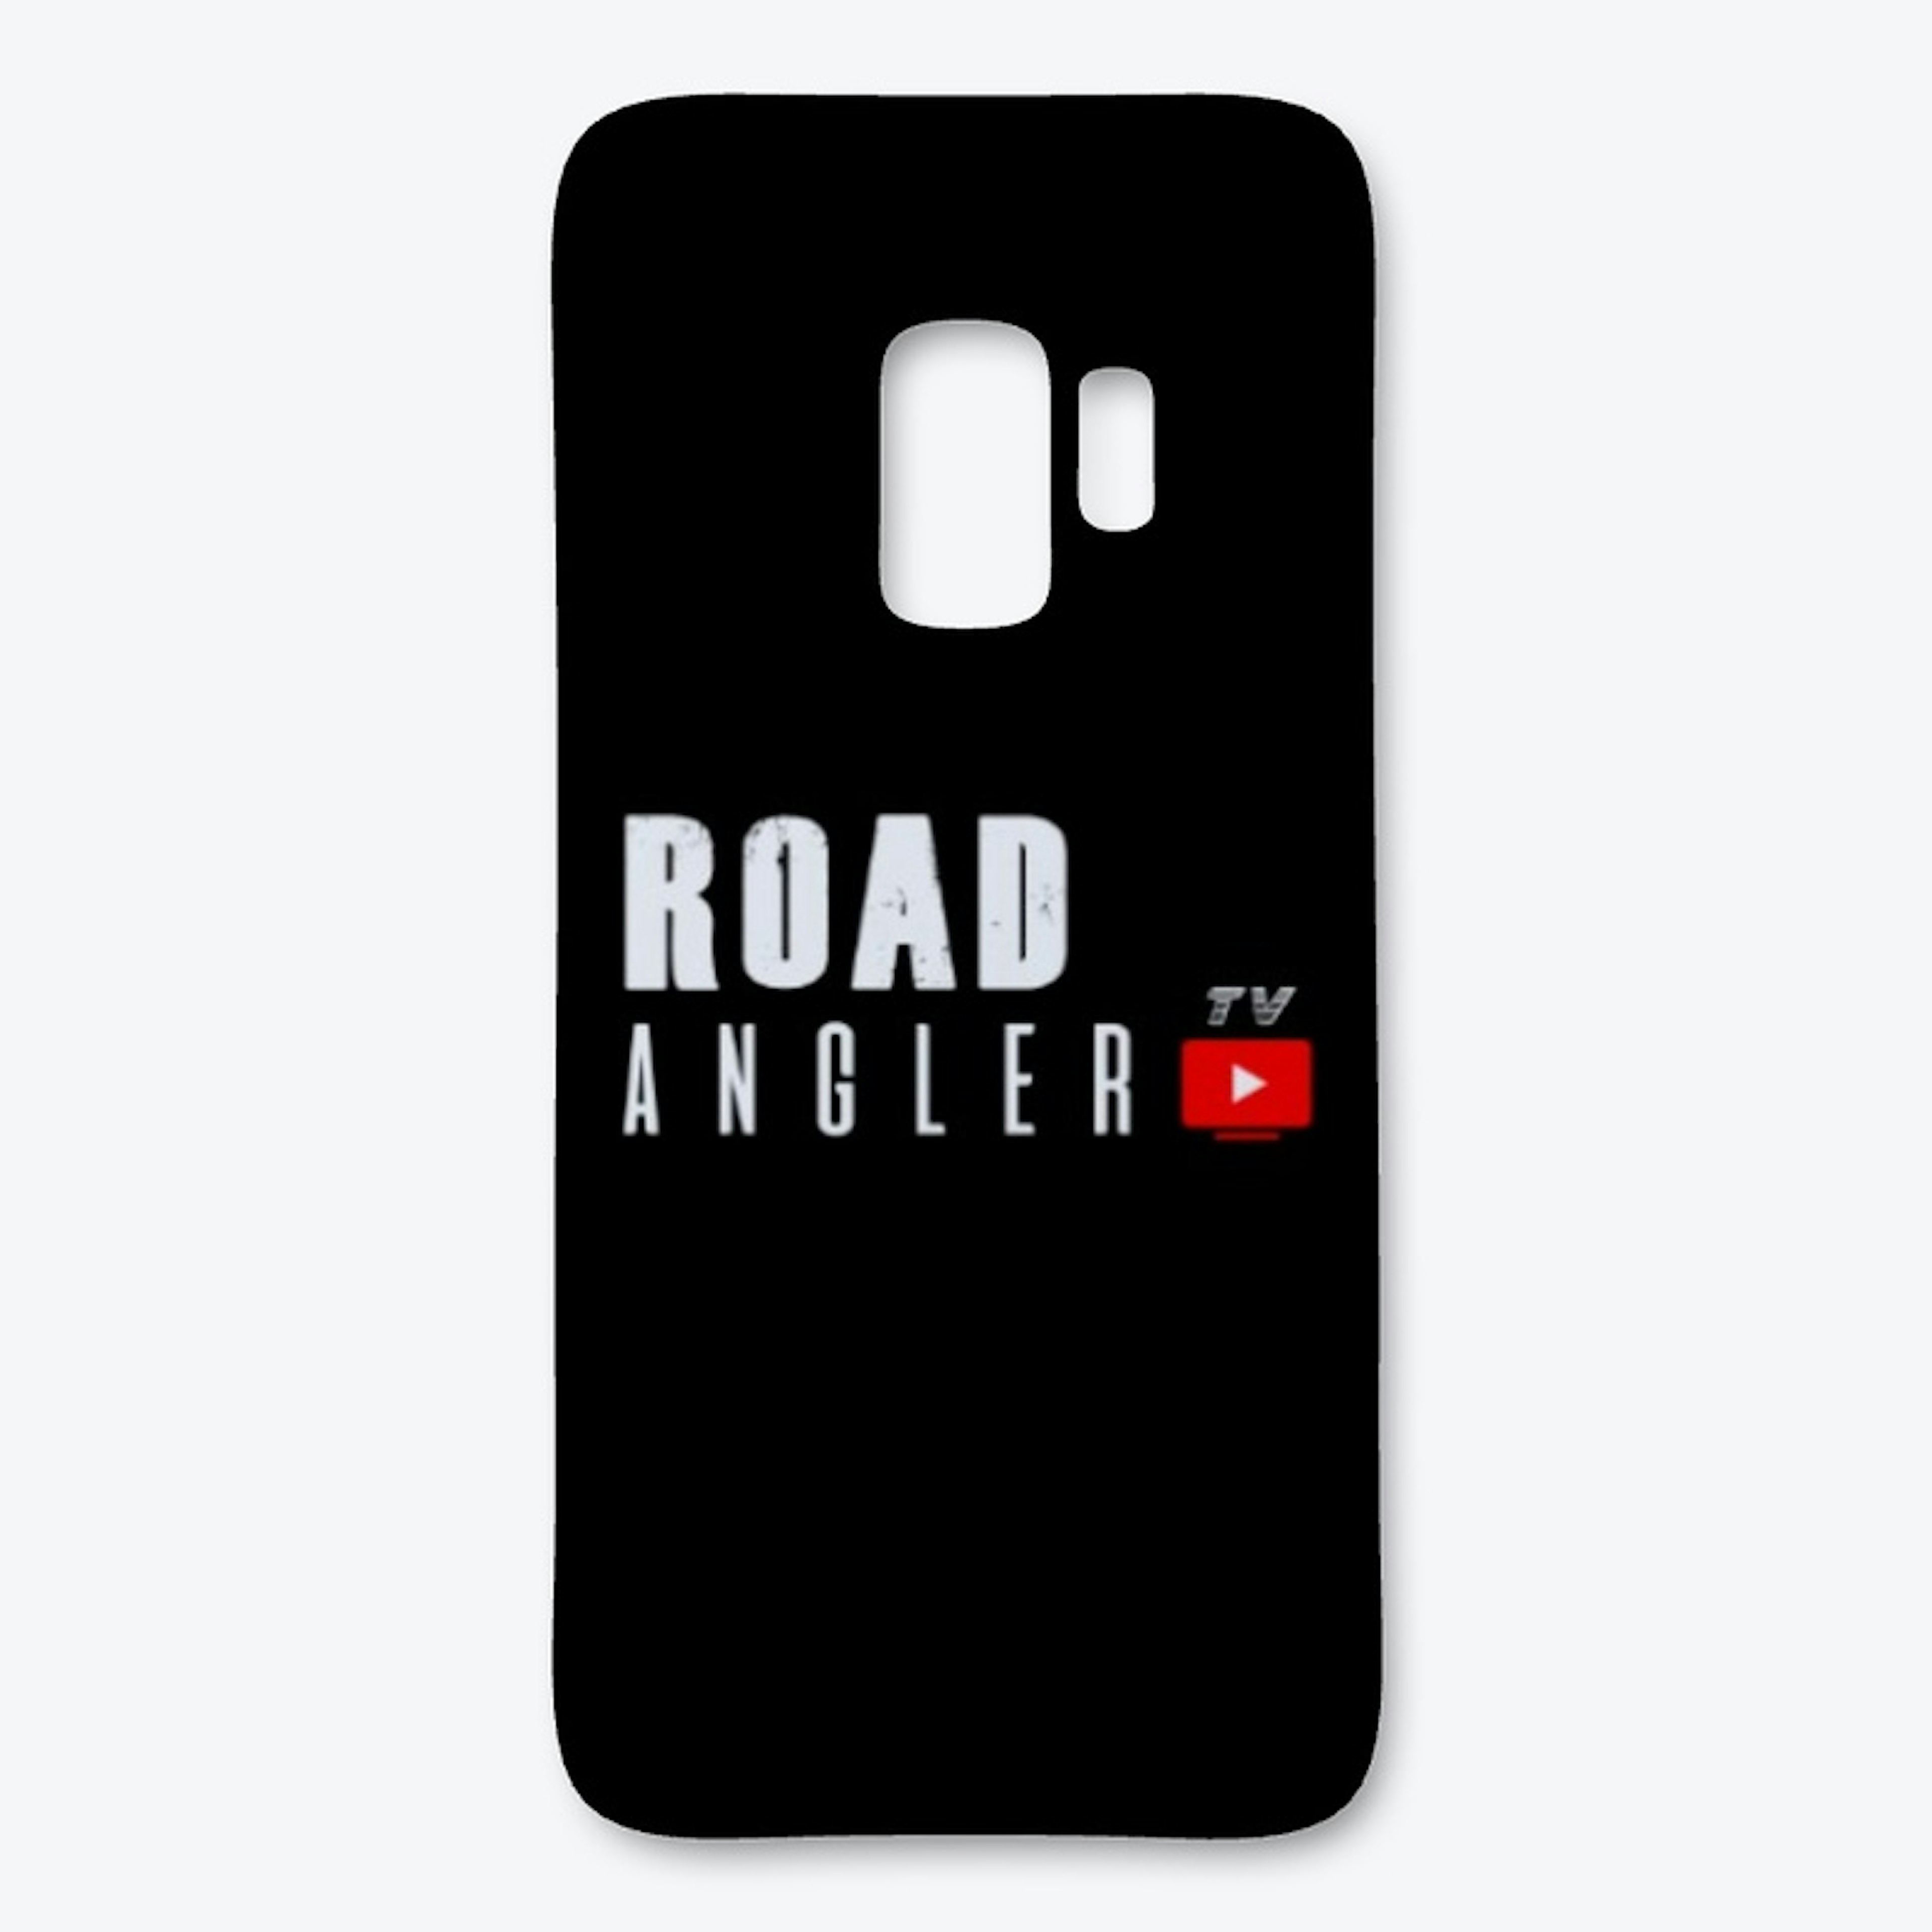 Road Angler TV iPhone & Samsung Case